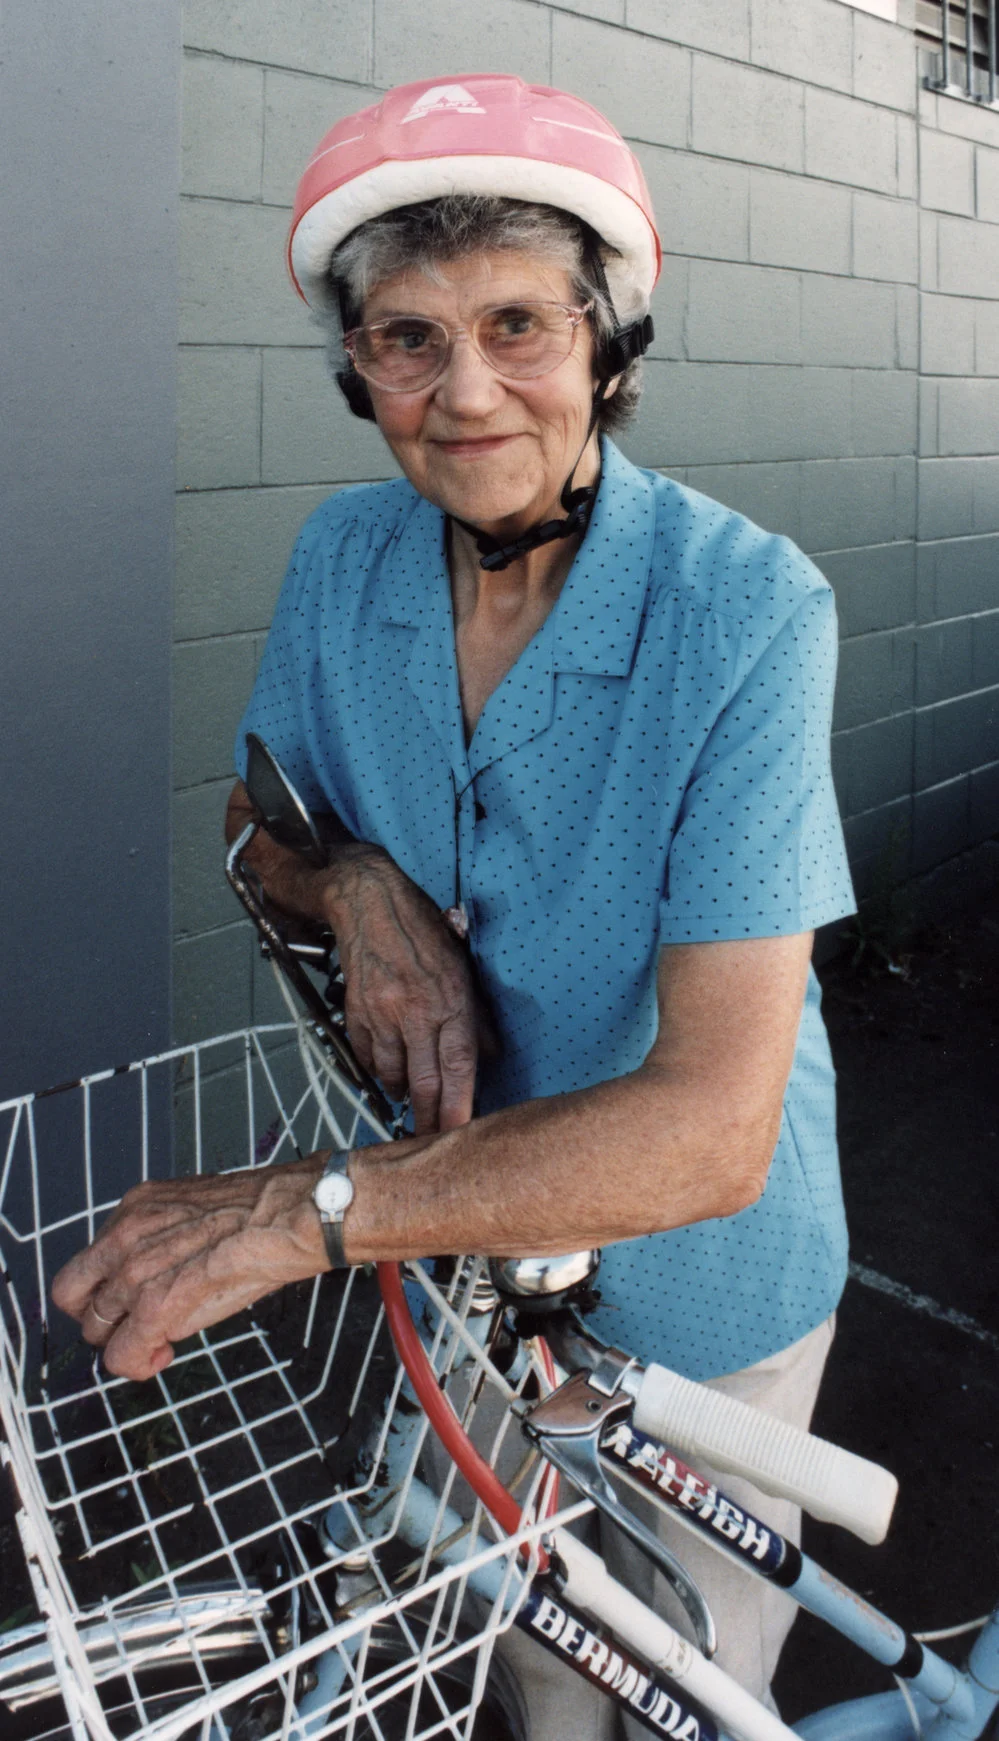 Viti Olds, planning to repeat a cycle ride to Petone on her 79th birthday.